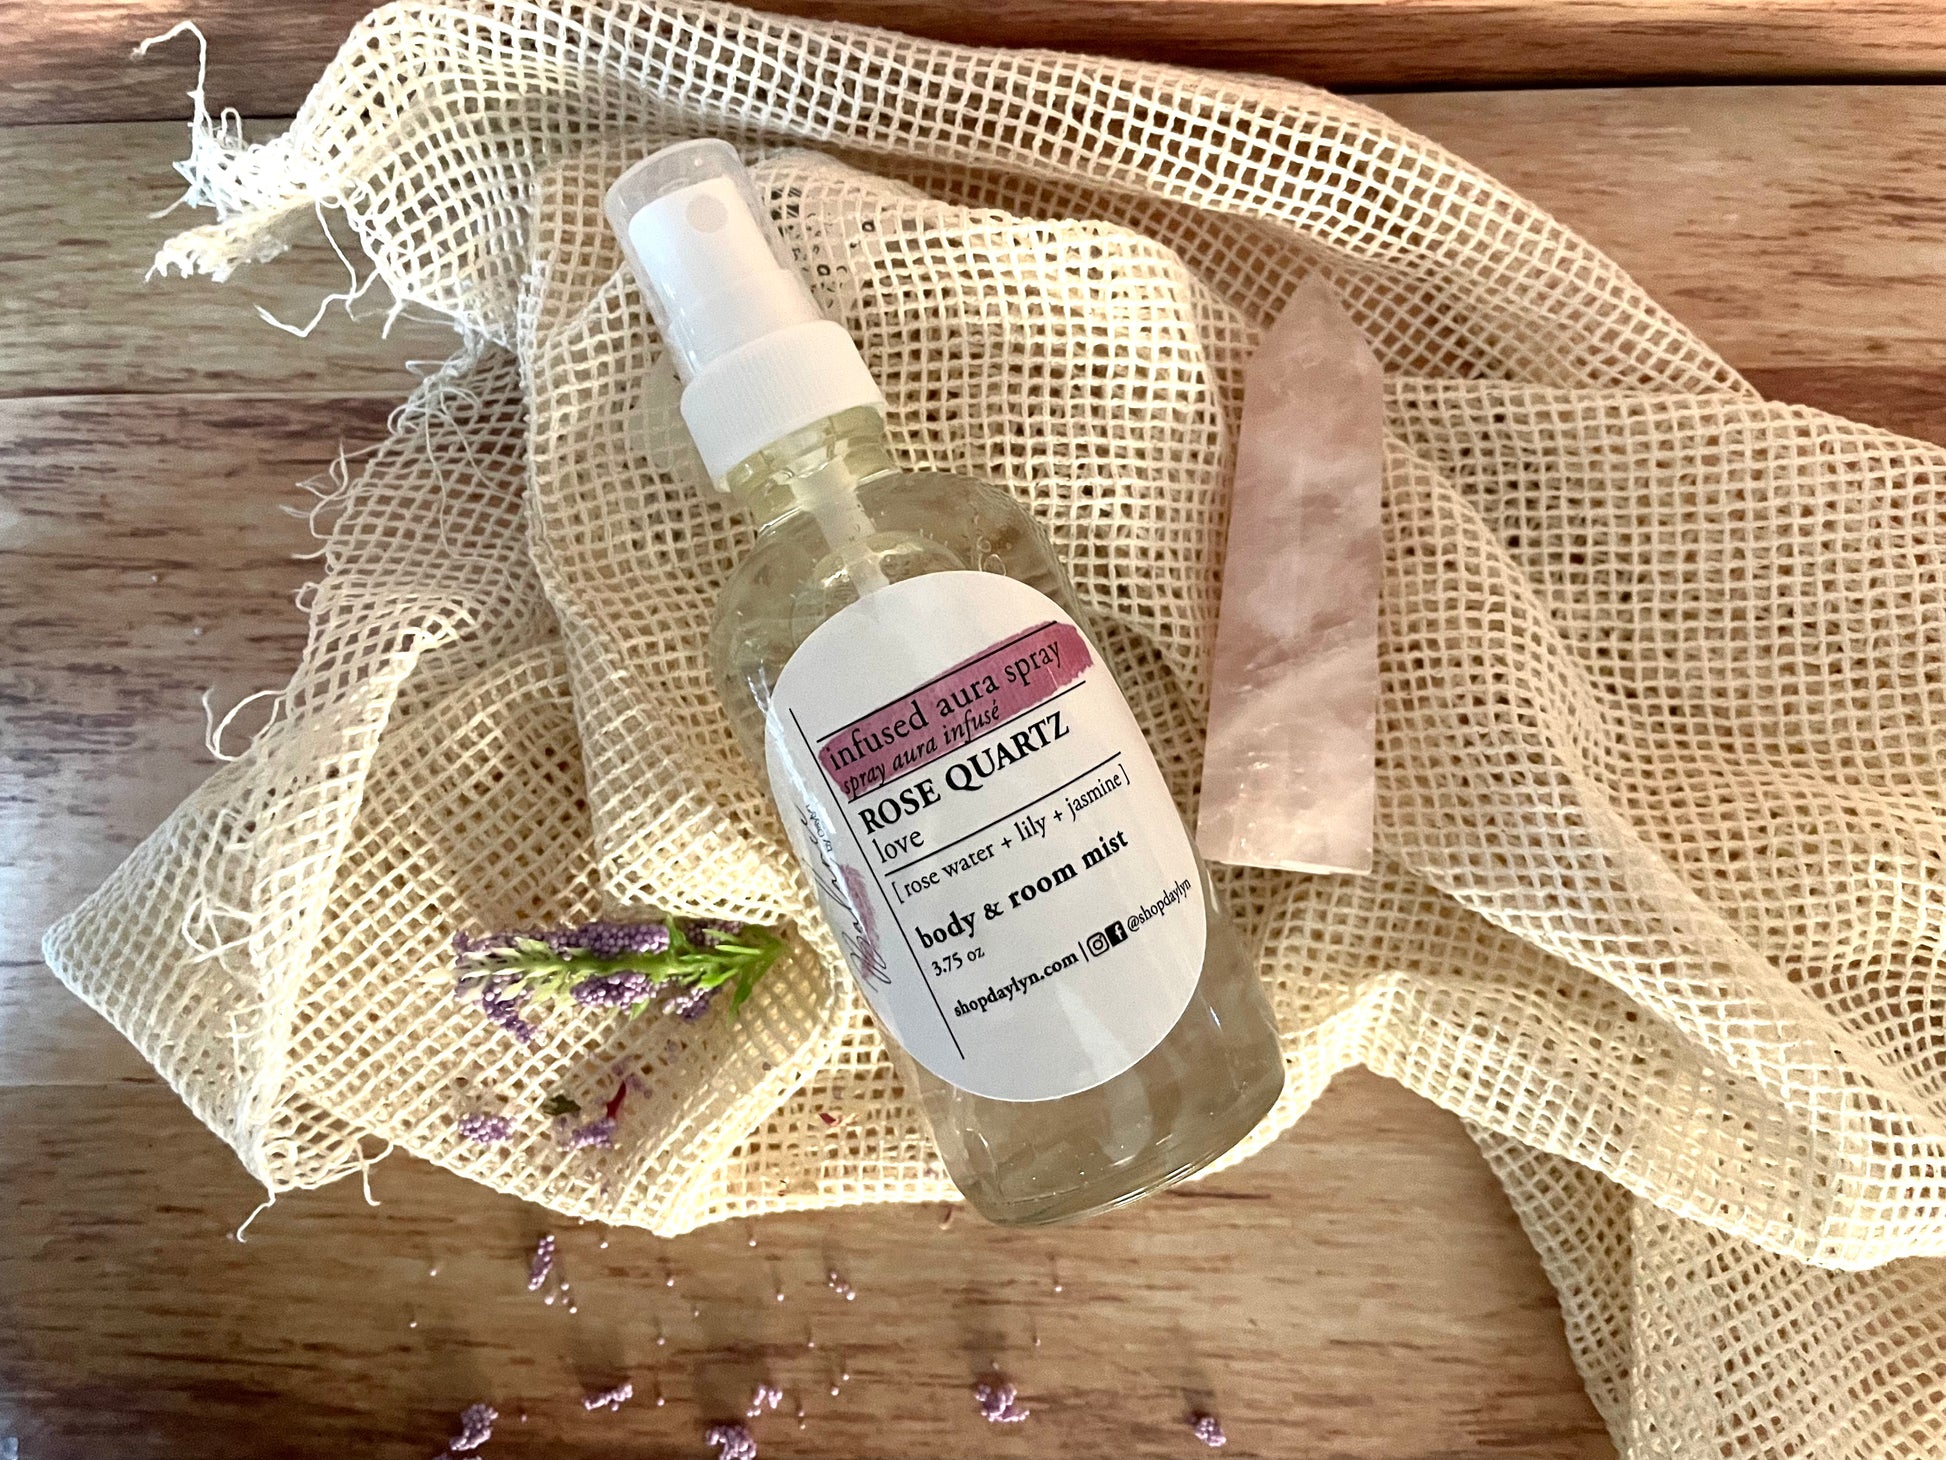 this rose quarts crystal infused aura spray is a divine mix of lily, jasmine, and rose scents to act as a body mist or aura setting spray